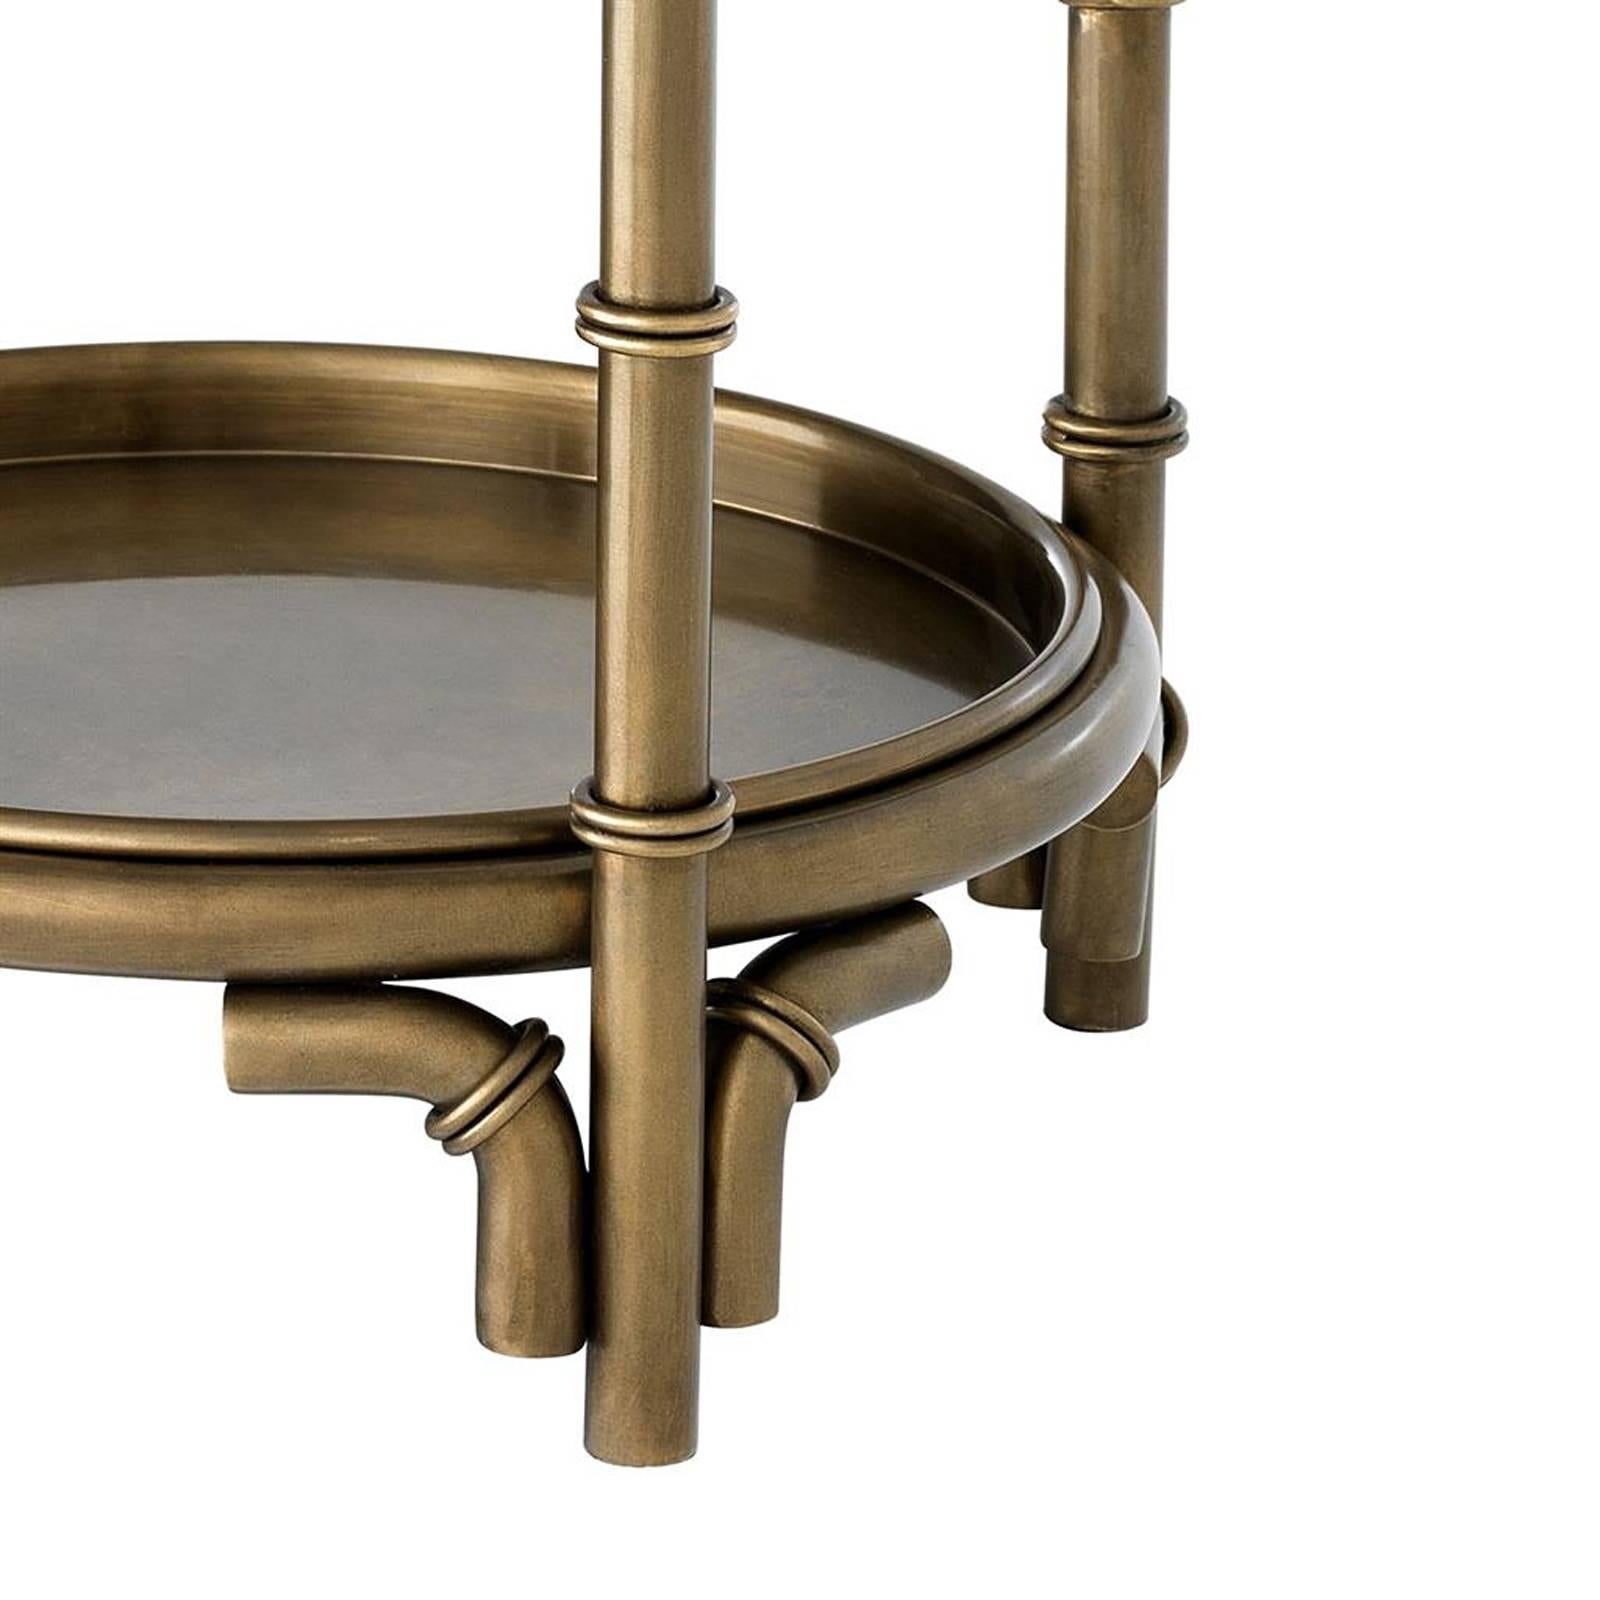 Polished Islands Umbrella Stand in Vintage Brass or Stainless Steel Finish